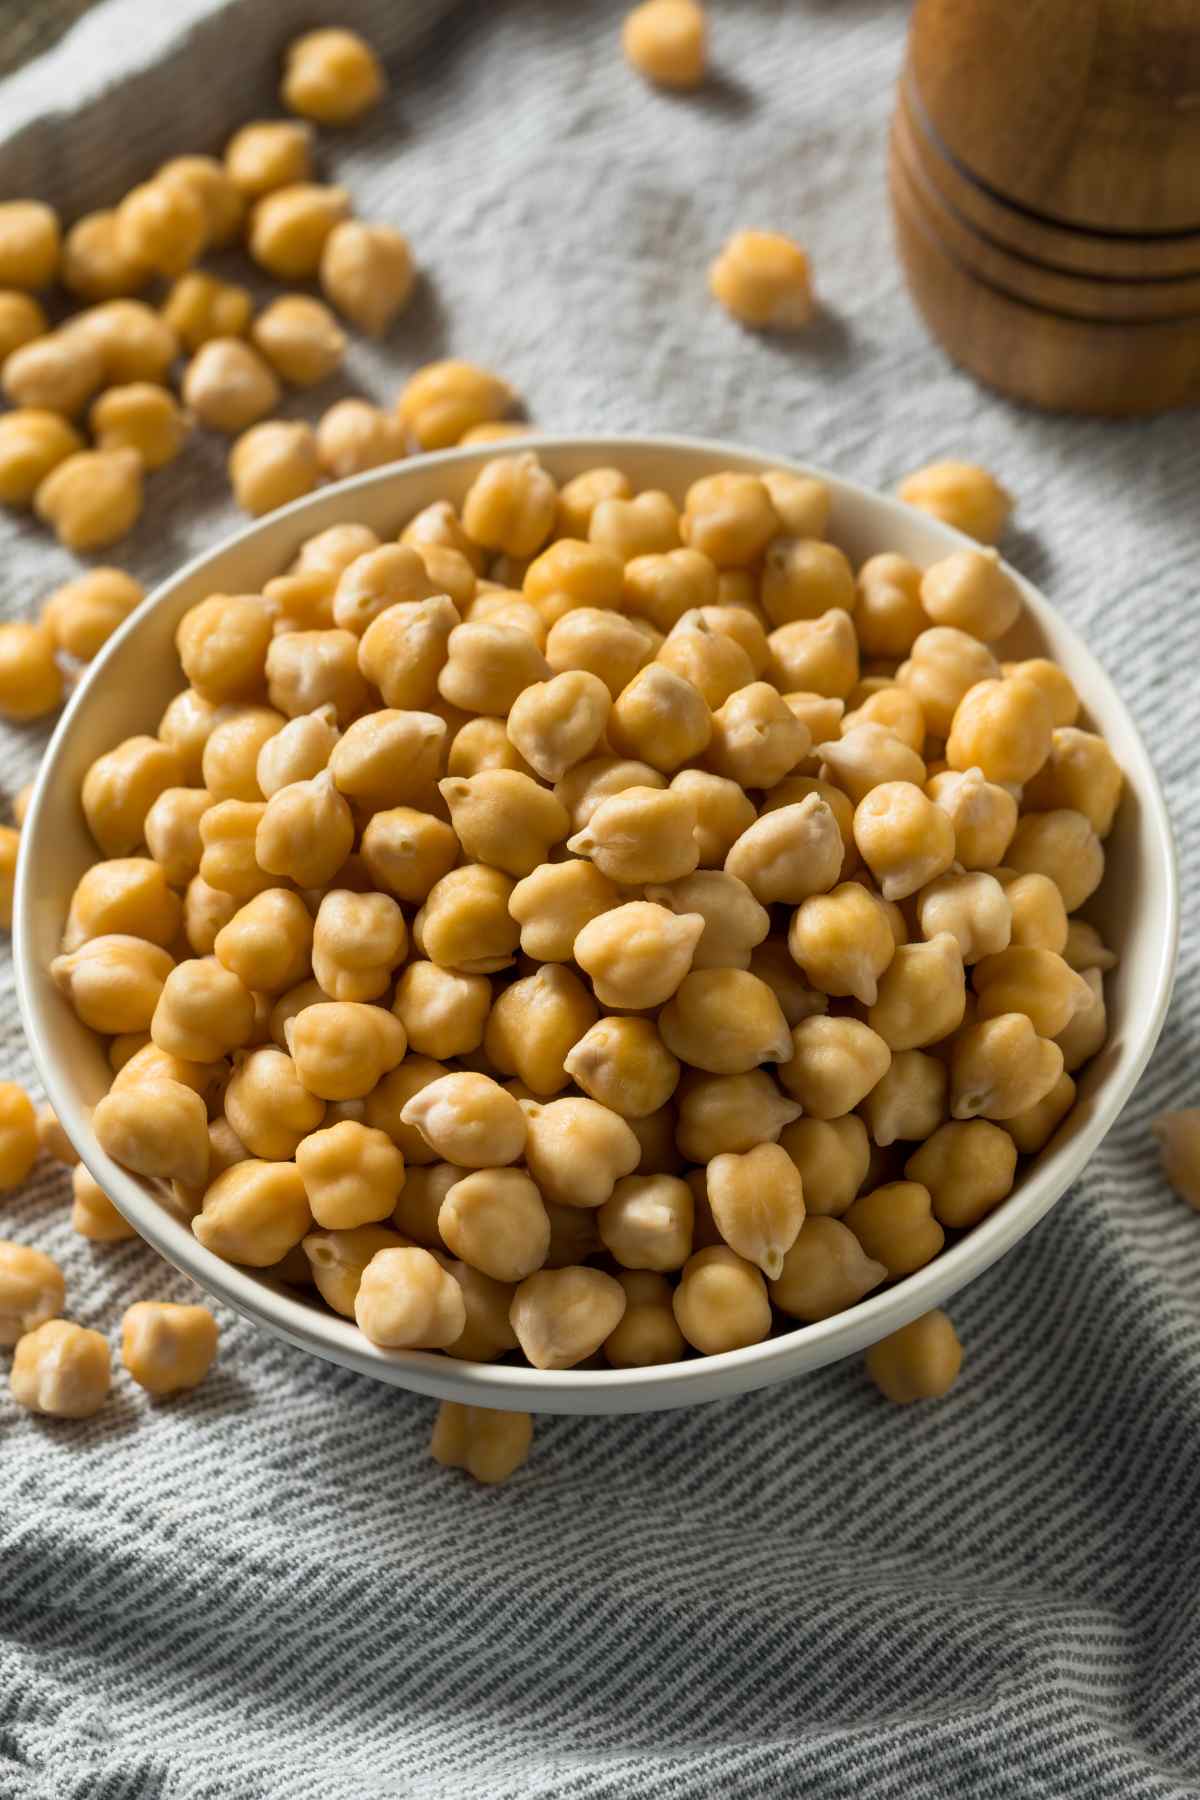 Chickpeas are also called garbanzo beans. Are chickpeas keto-friendly, and how many carbs do they contain? In this post, we’ll explore whether you can eat chickpeas when you are following a keto diet, their carb content, and other details about chickpeas, including their nutrition facts, benefits, risks, and substitutes.